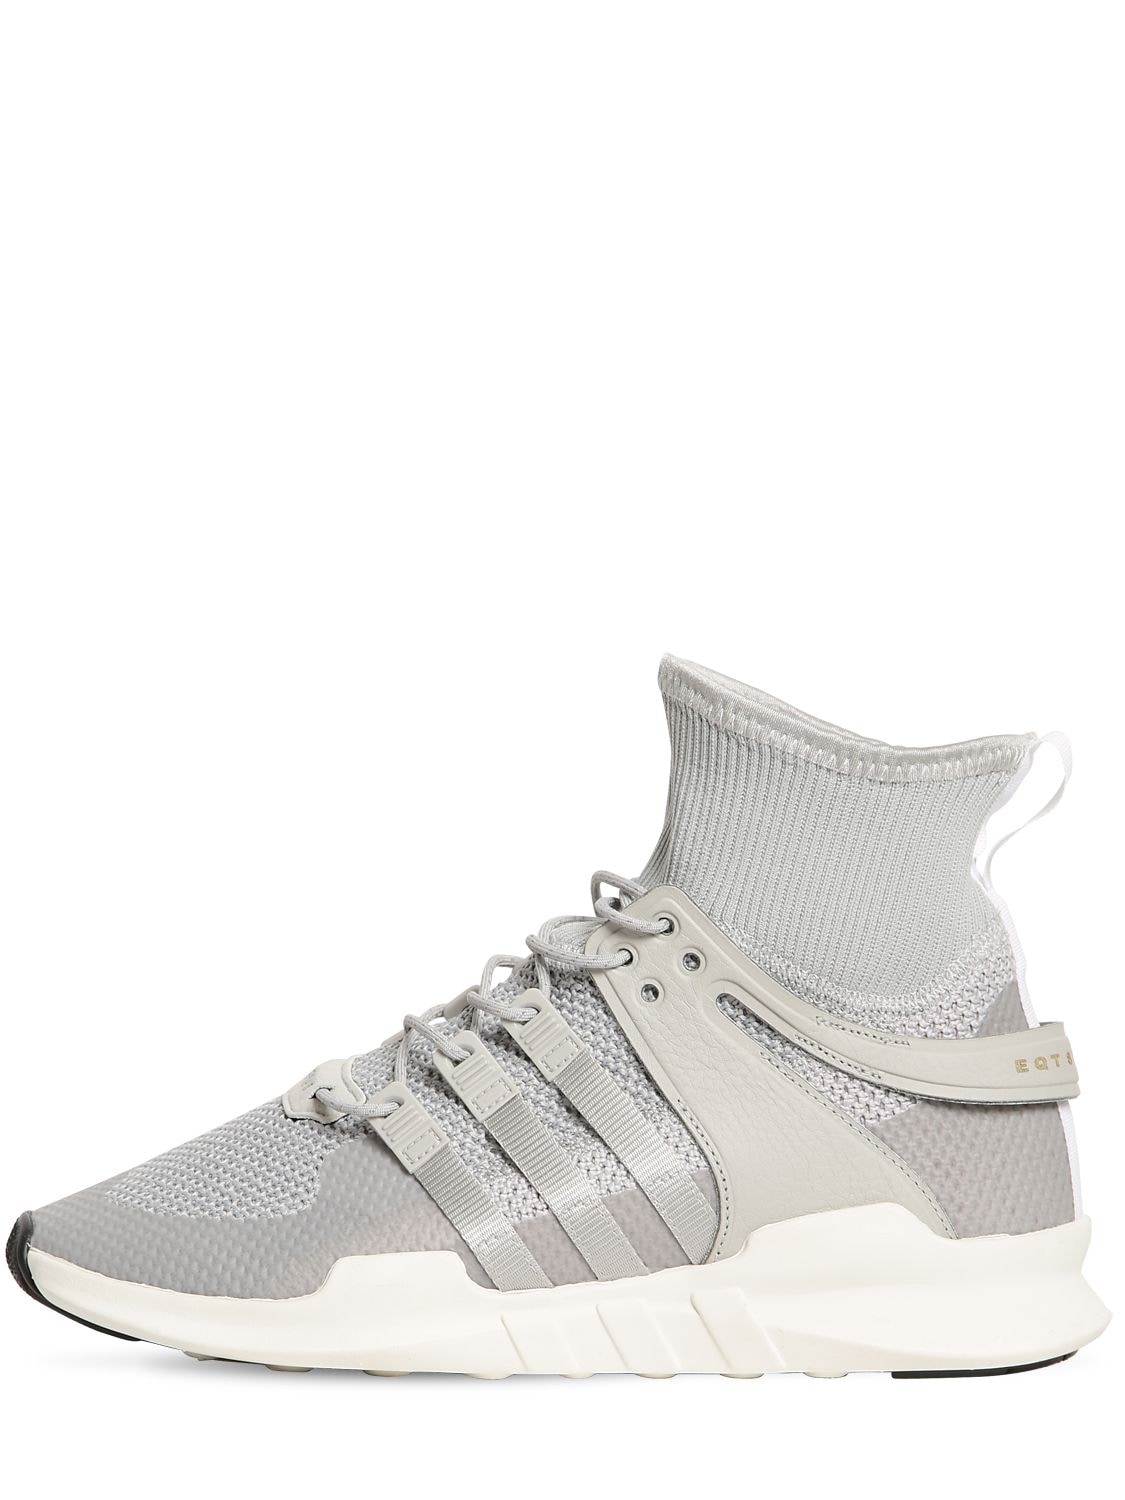 Eqt Support Adv Sneakers